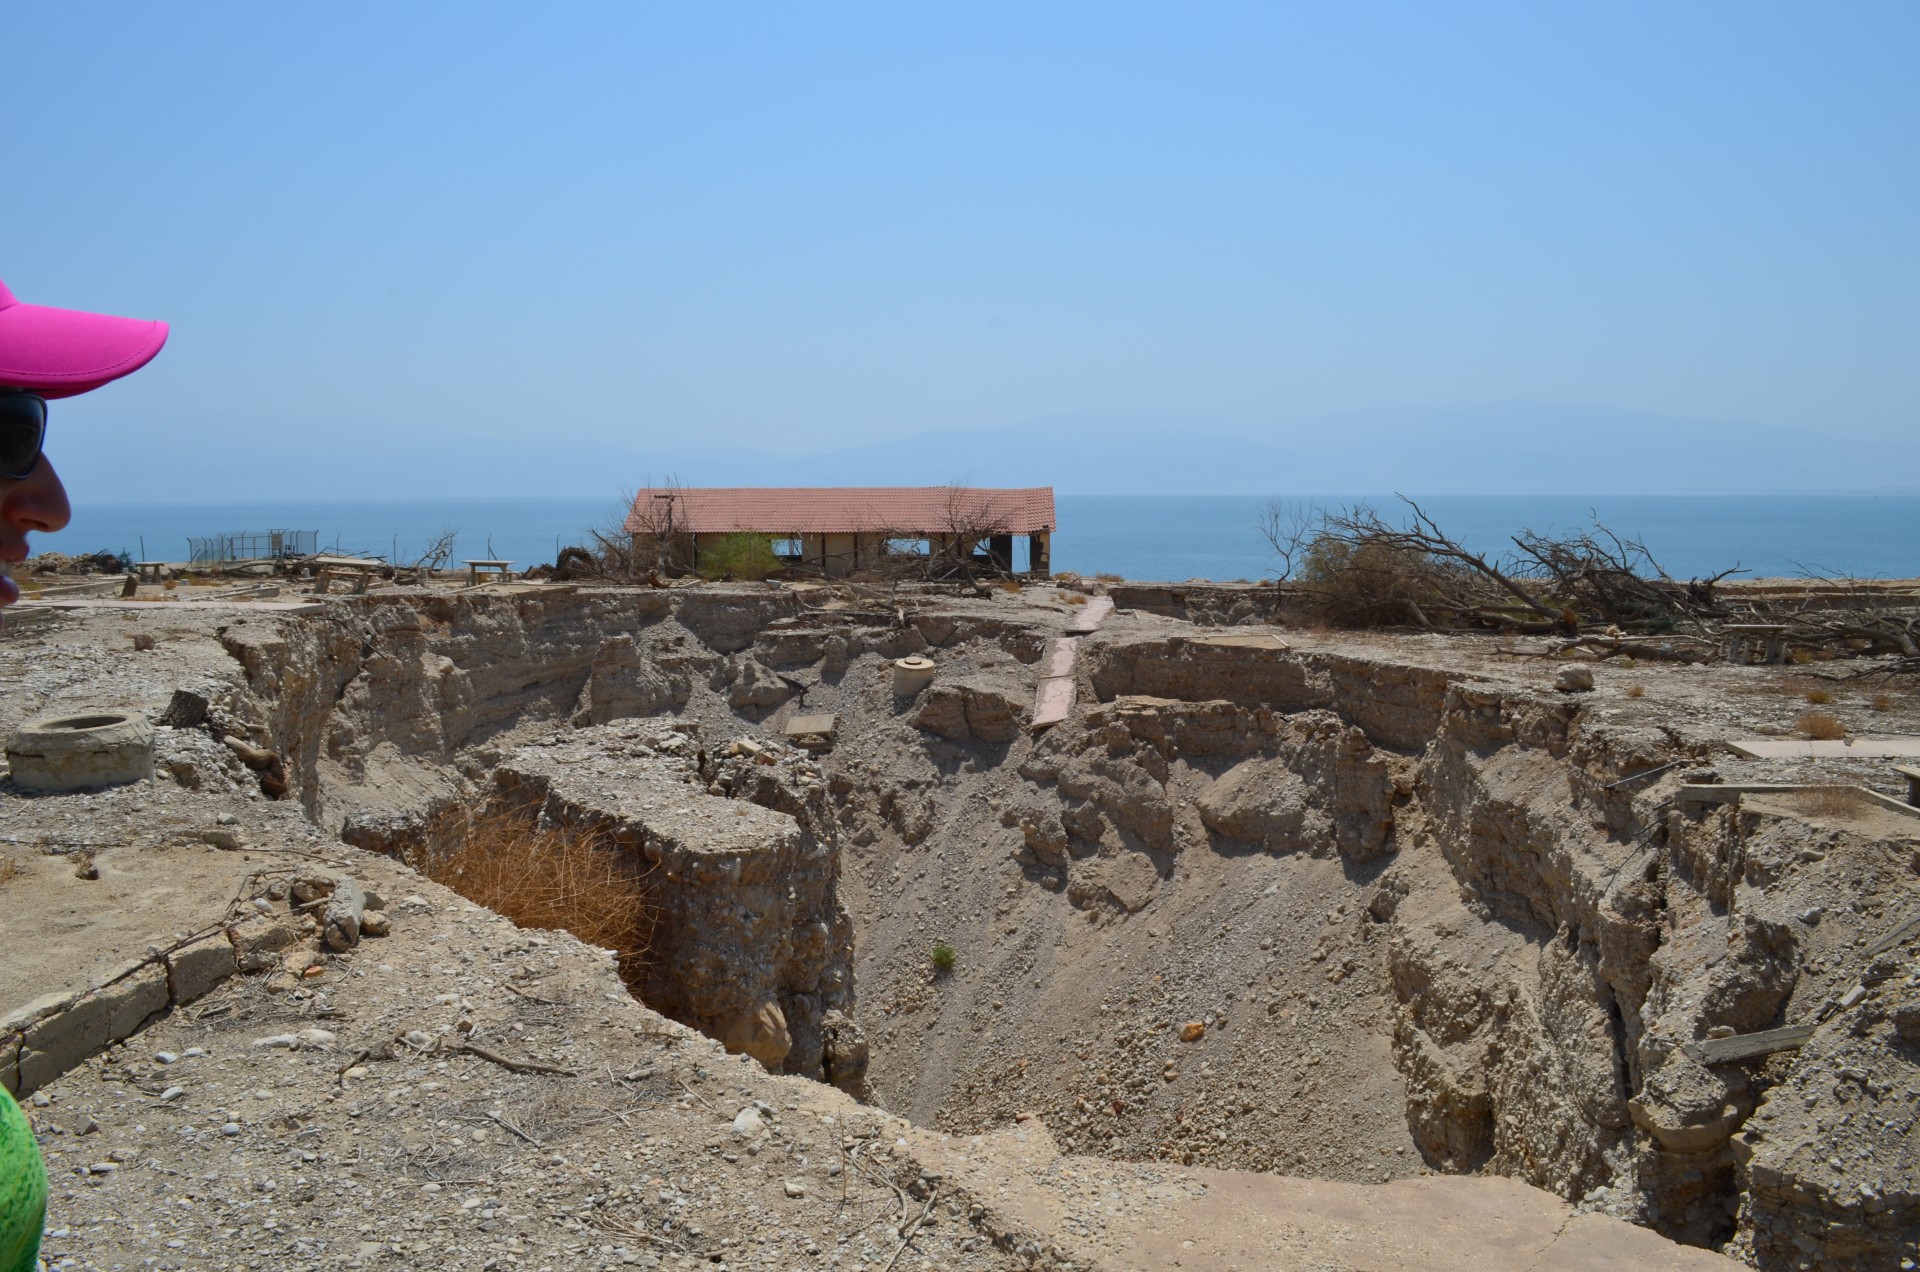 One result of dropping sea level: land along the shoreline is collapsing. Here, a sinkhole swallows the remains of a onetime Israeli beach resort.